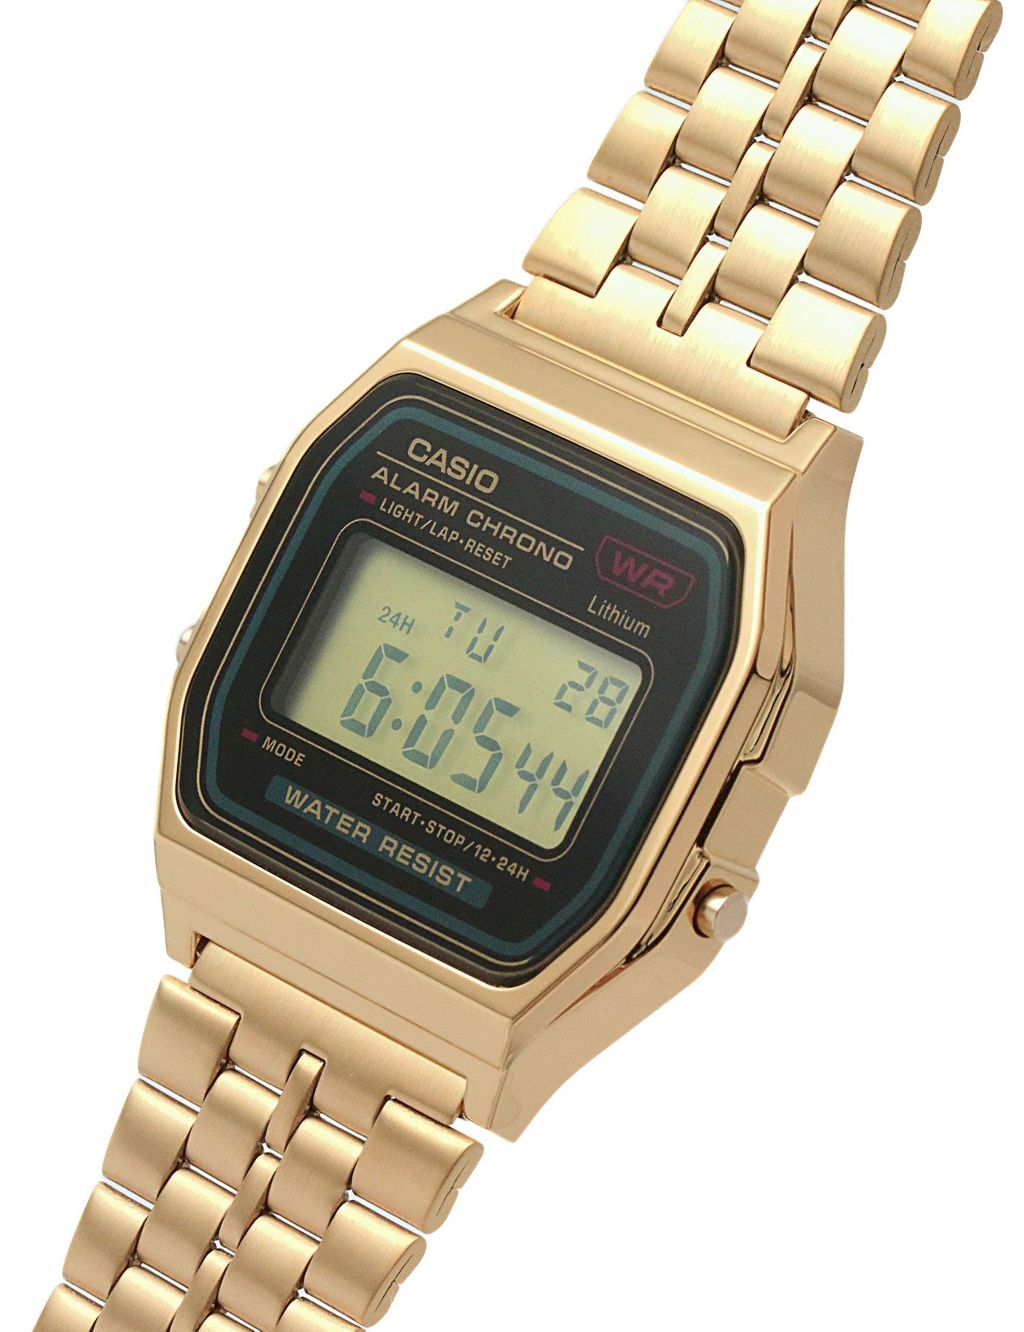 Casio Gold Stainless Steel Chronograph Watch image 3